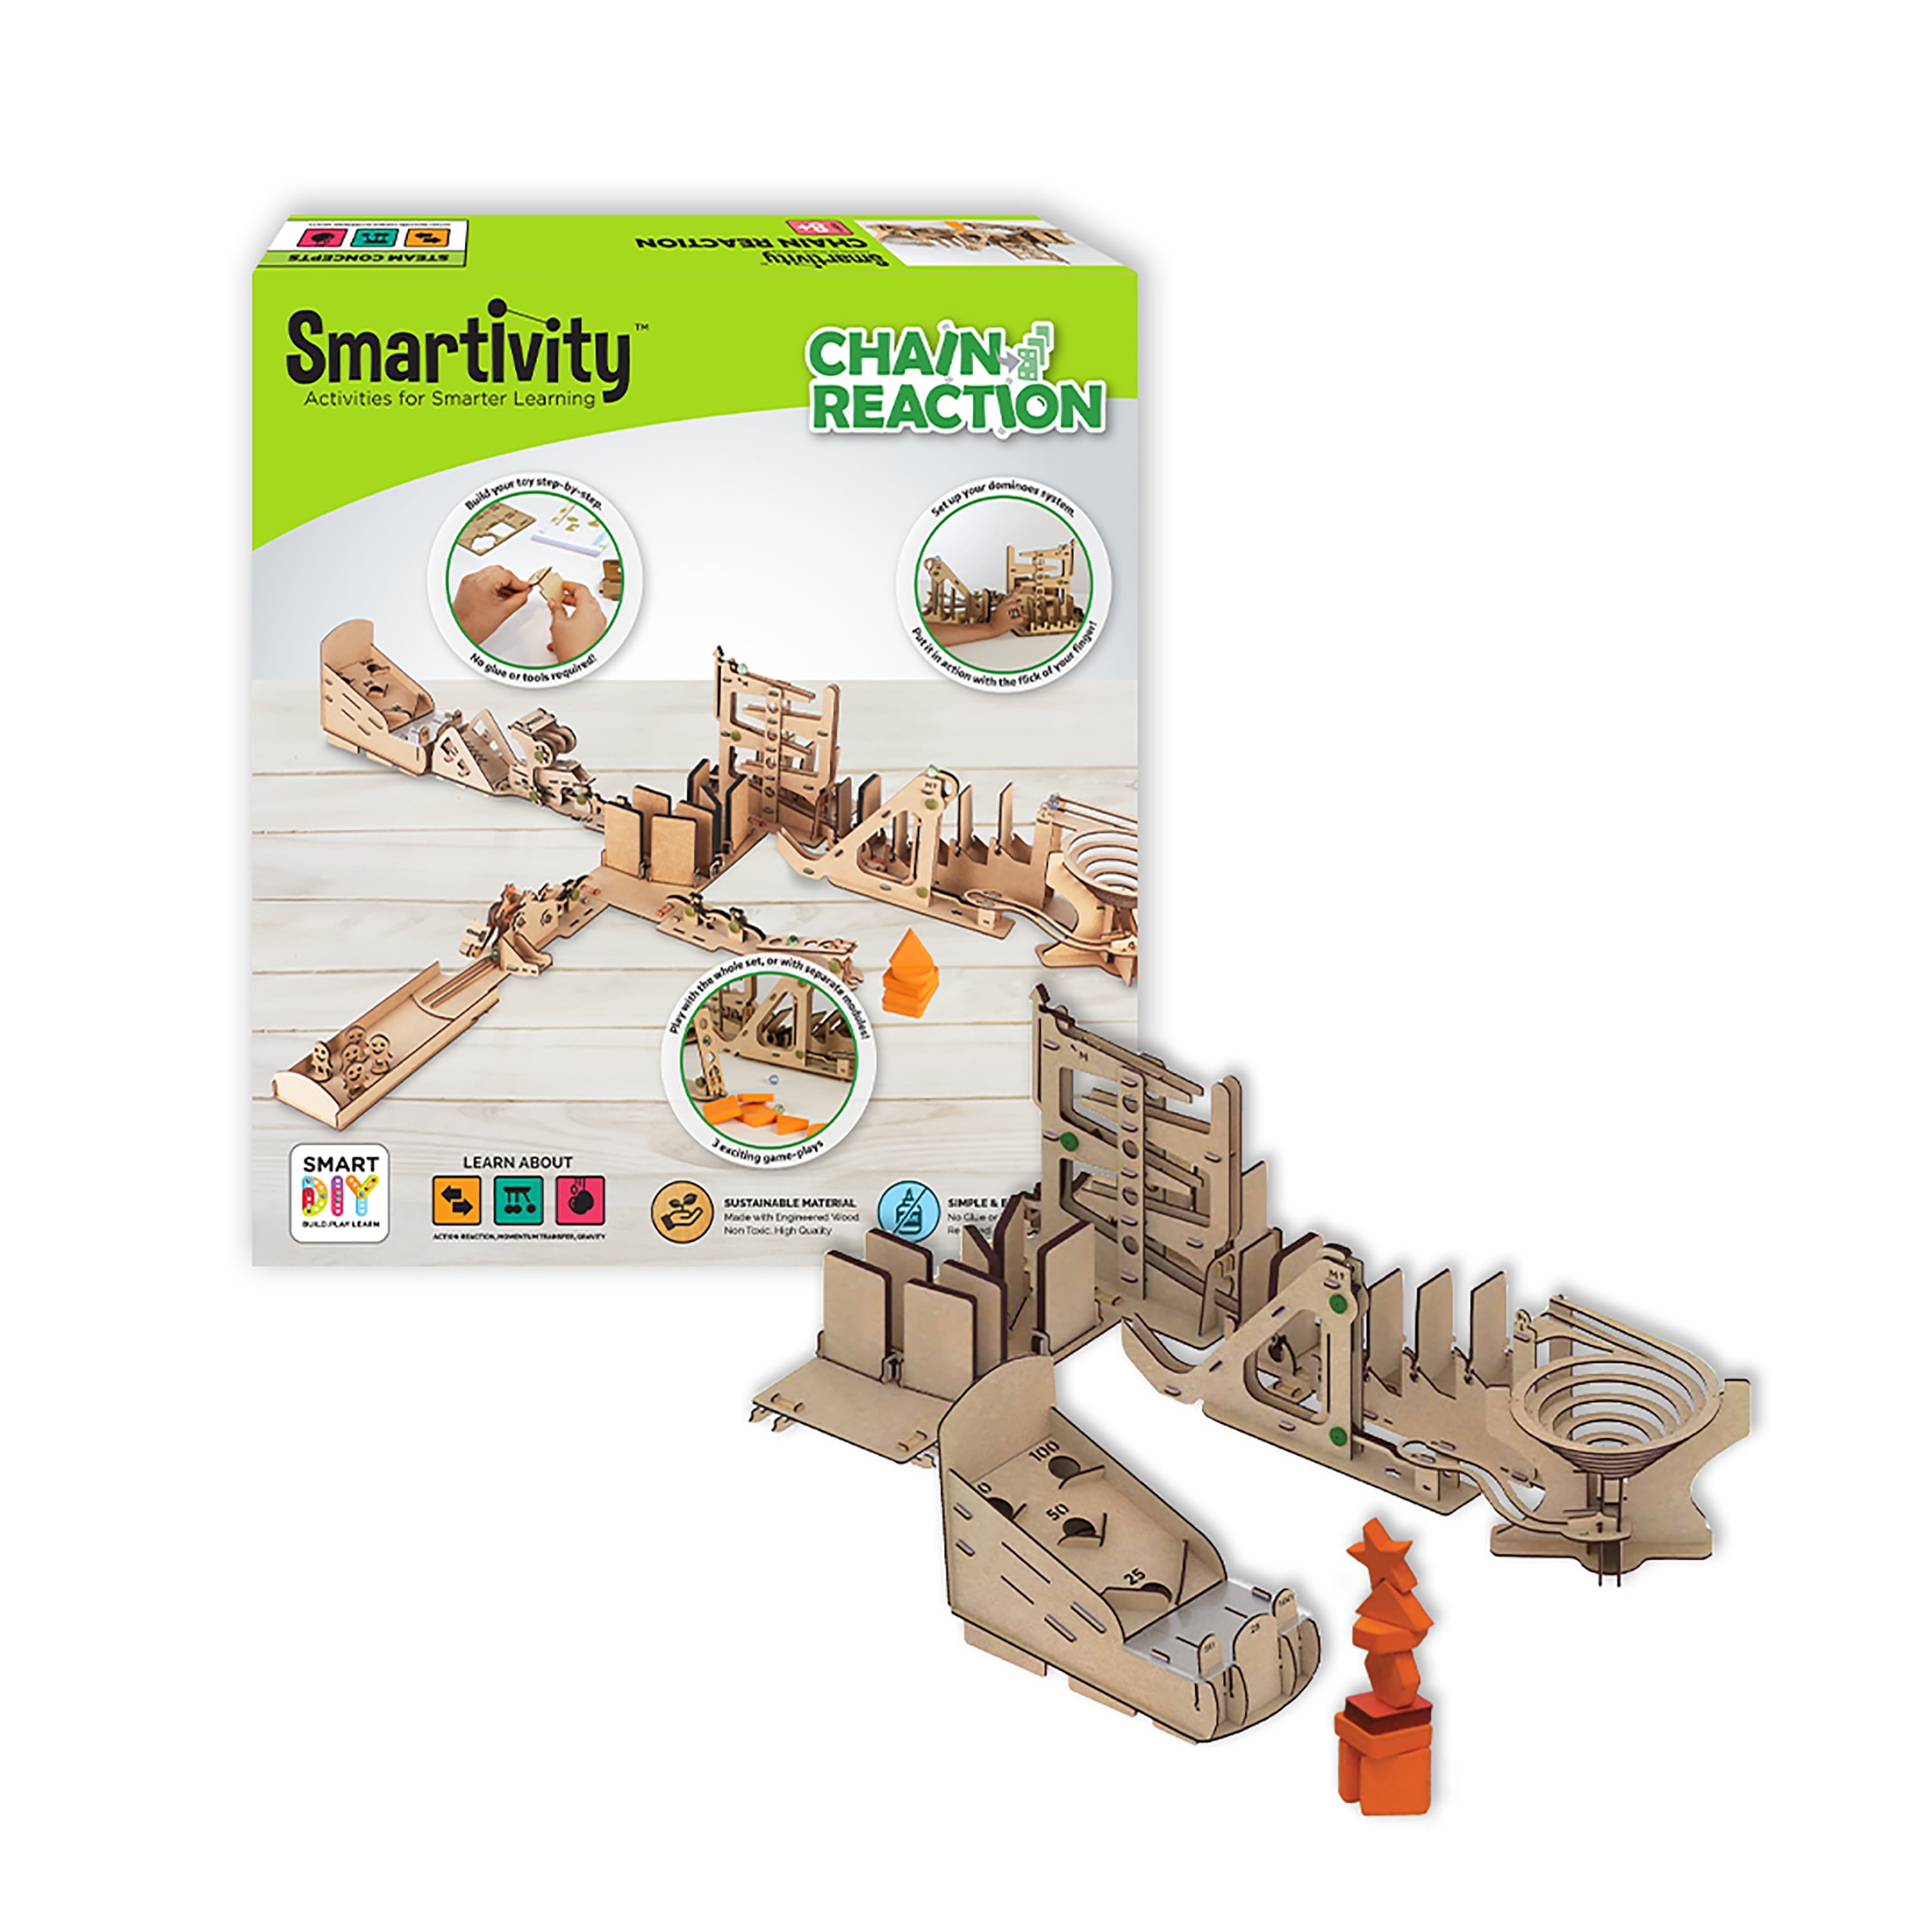 Smartivity Chain Reaction Colliding Dominoes Stem Learning Toy for Kids